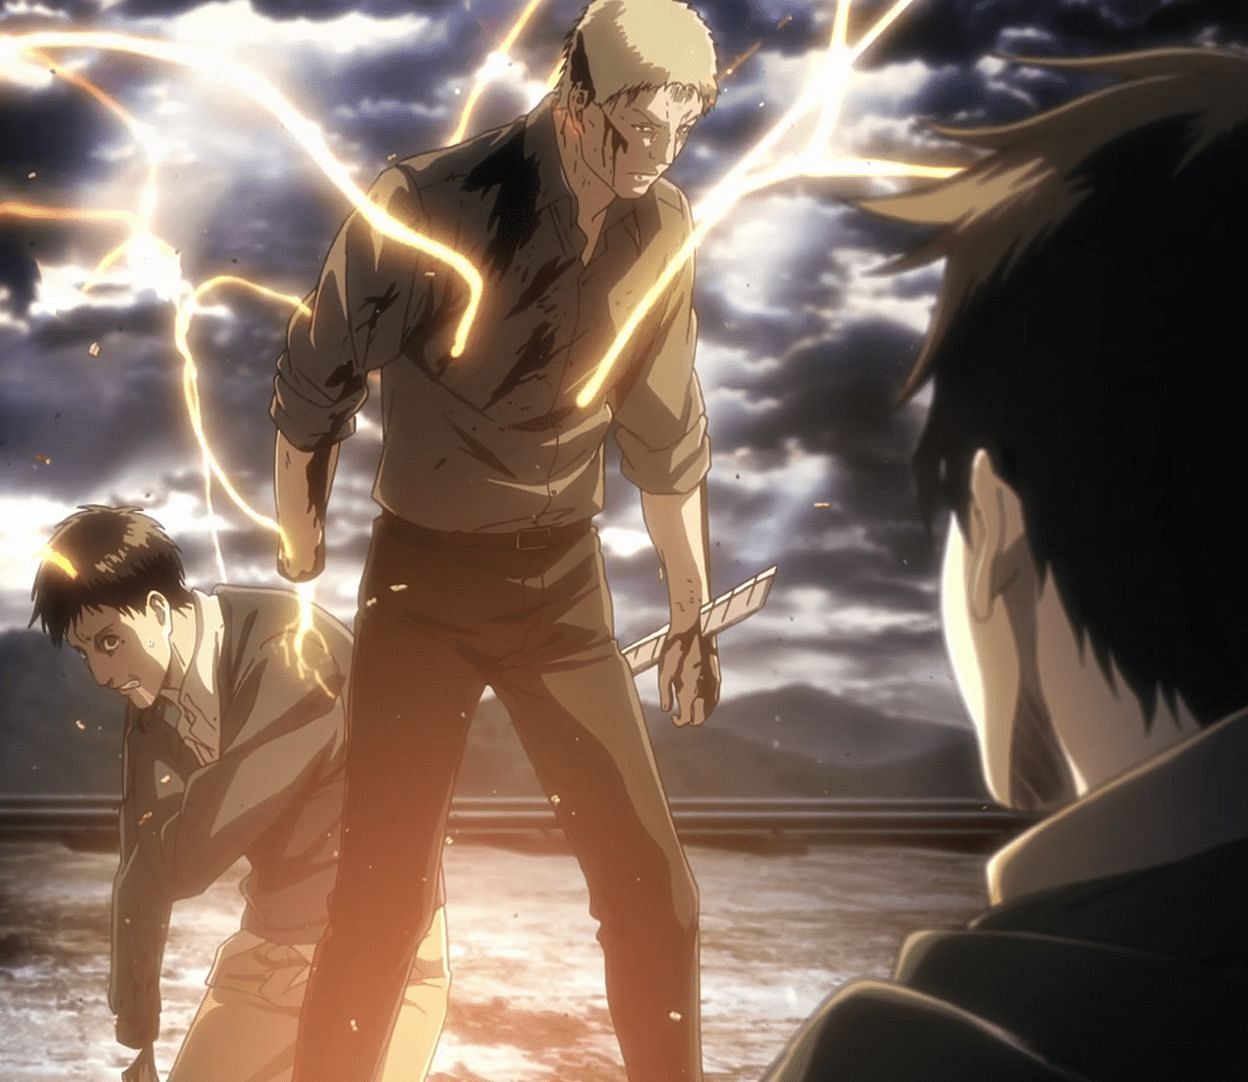 Reiner and Bertholdt activating their Titan Shifting powers as seen in Season 2 of the Attack on Titan anime (Image via Wit Studio)